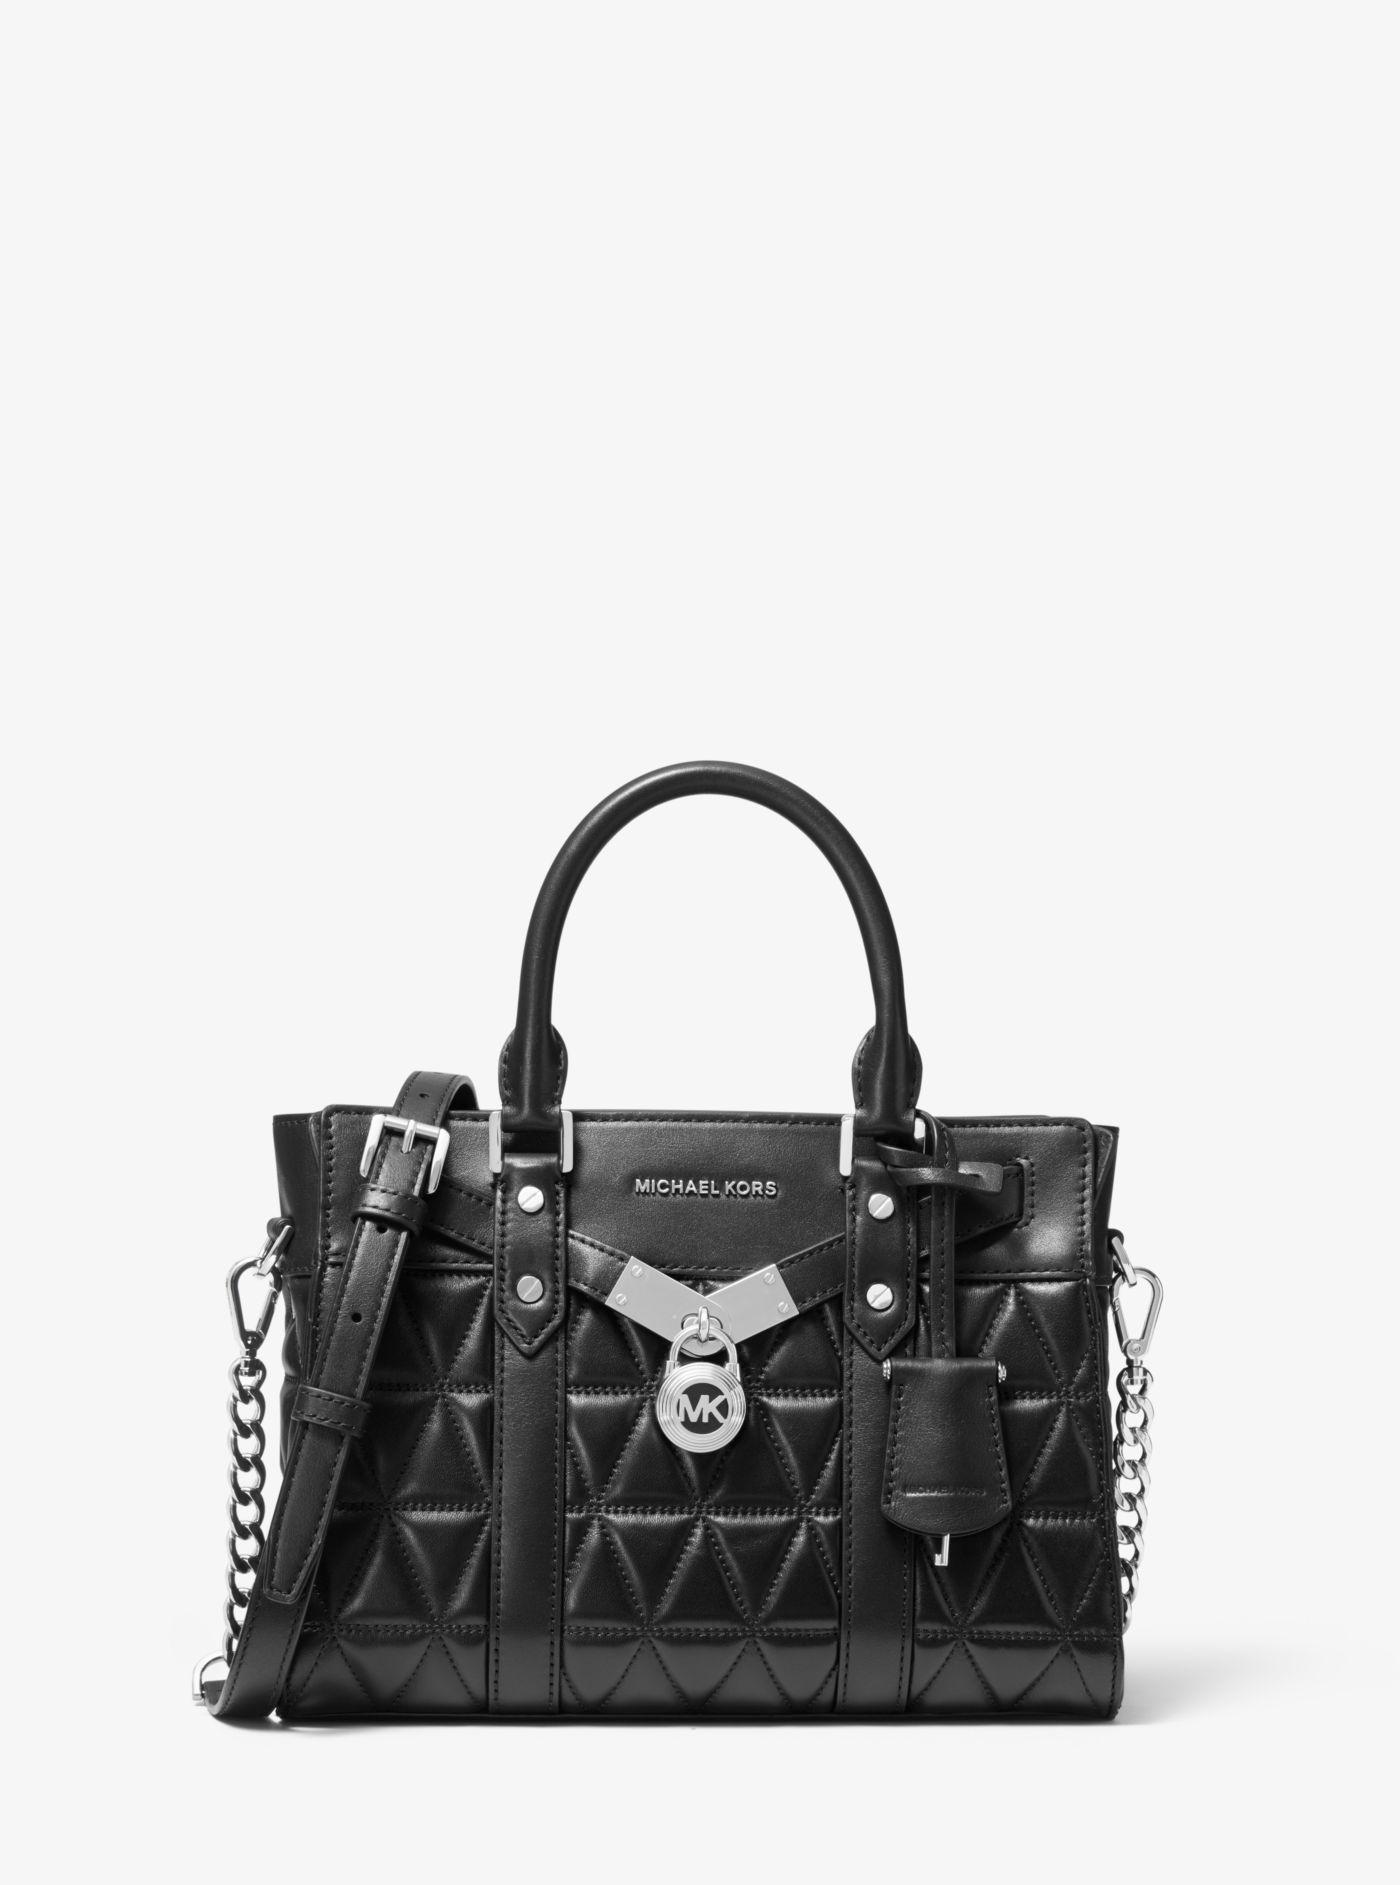 Michael Kors Nouveau Hamilton Small Quilted Leather Satchel in Black - Lyst